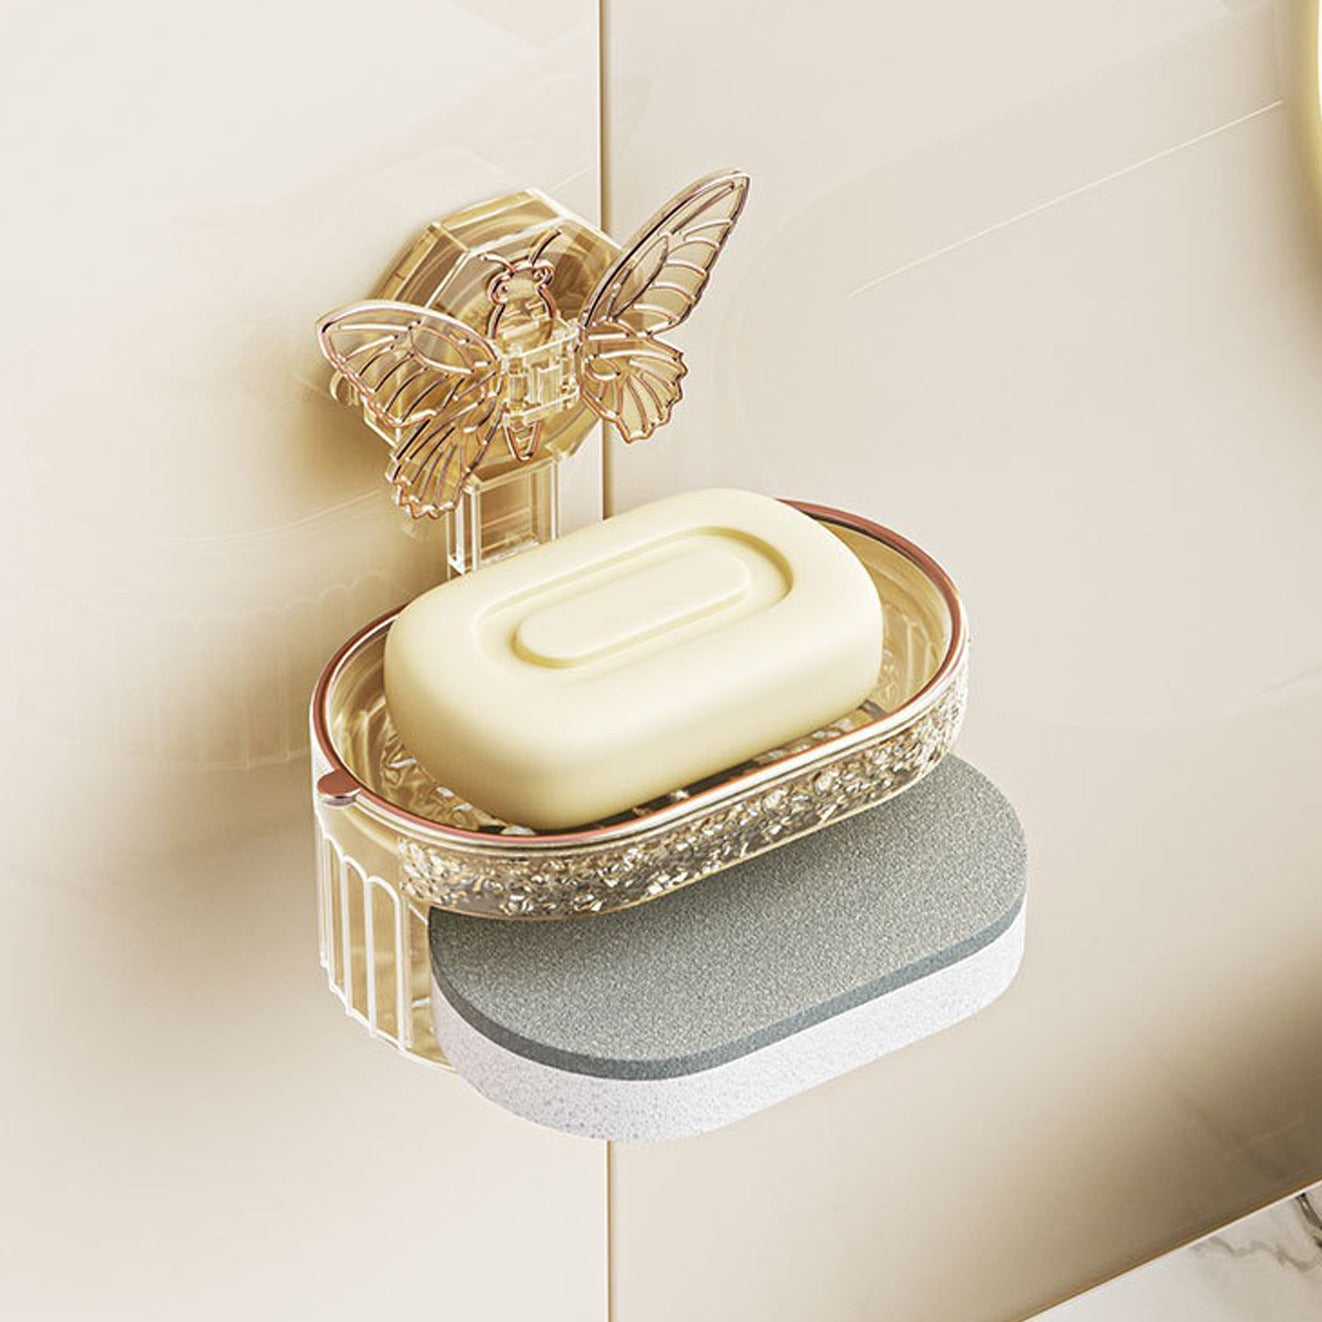 A soap placed on the Double-Layer Butterfly Suction Cup Soap Box